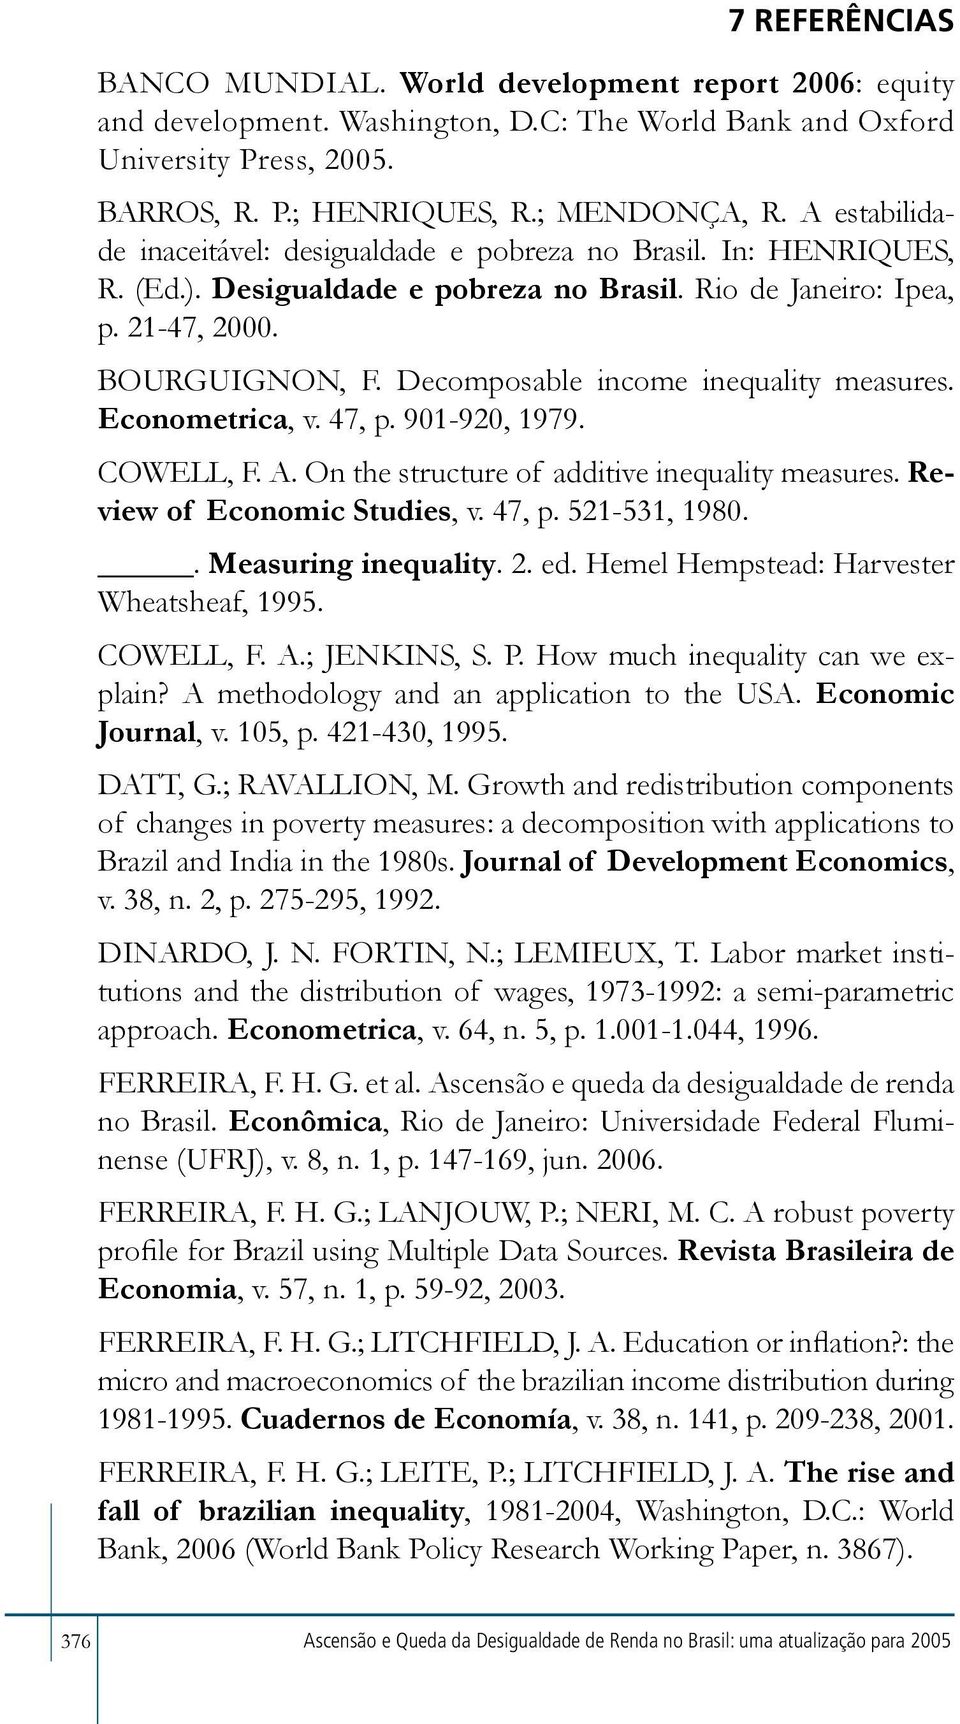 Decomposable income inequality measures. Econometrica, v. 47, p. 901-920, 1979. COWELL, F. A. On the structure of additive inequality measures. Review of Economic Studies, v. 47, p. 521-531, 1980.